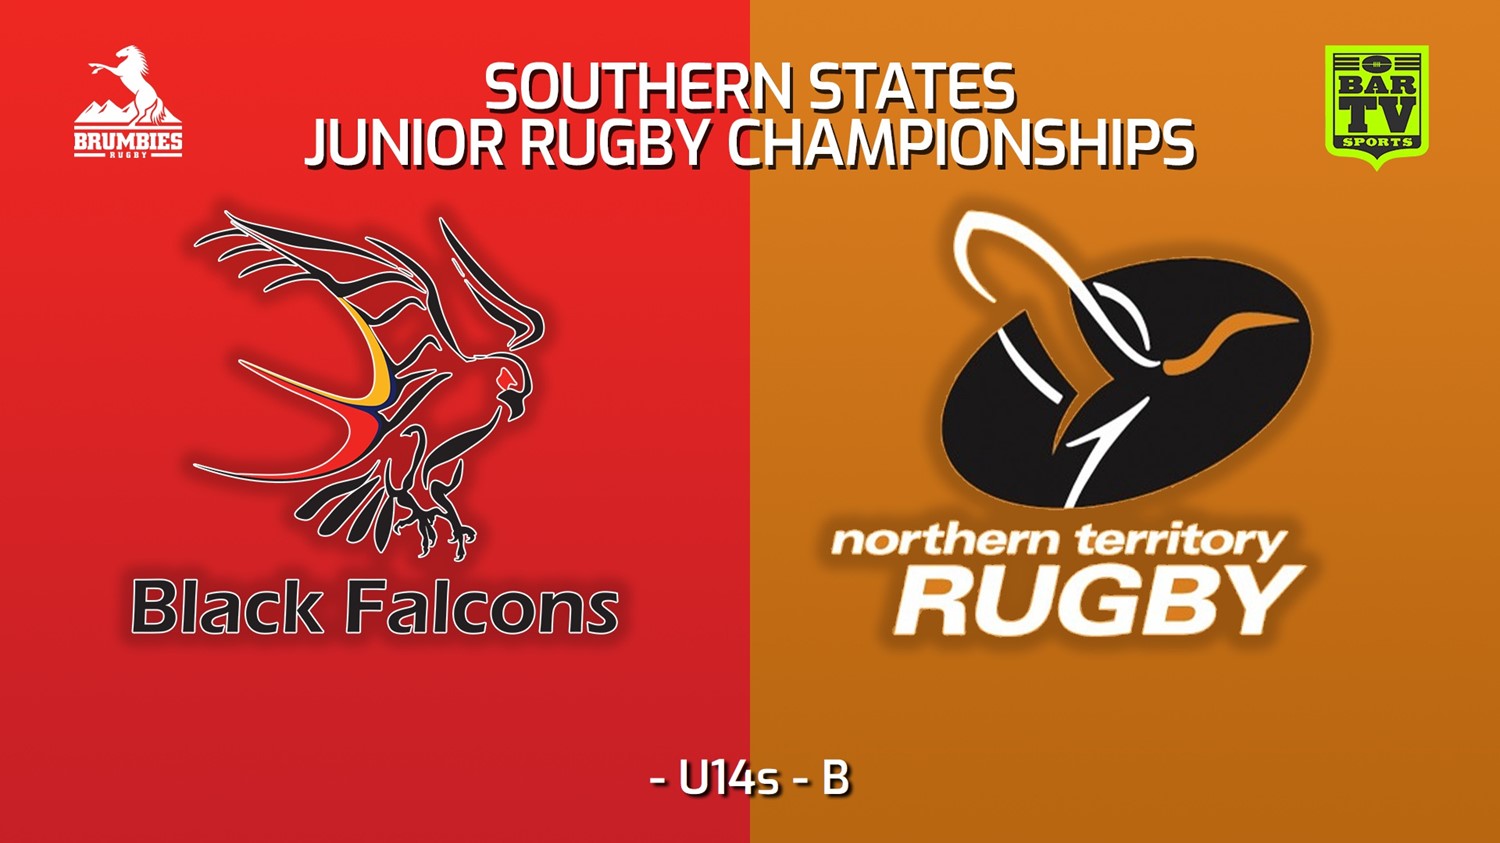 220713-2022 Southern States Junior Rugby Championships U14s - B - South Australia v Northern Territory Rugby (1) Slate Image